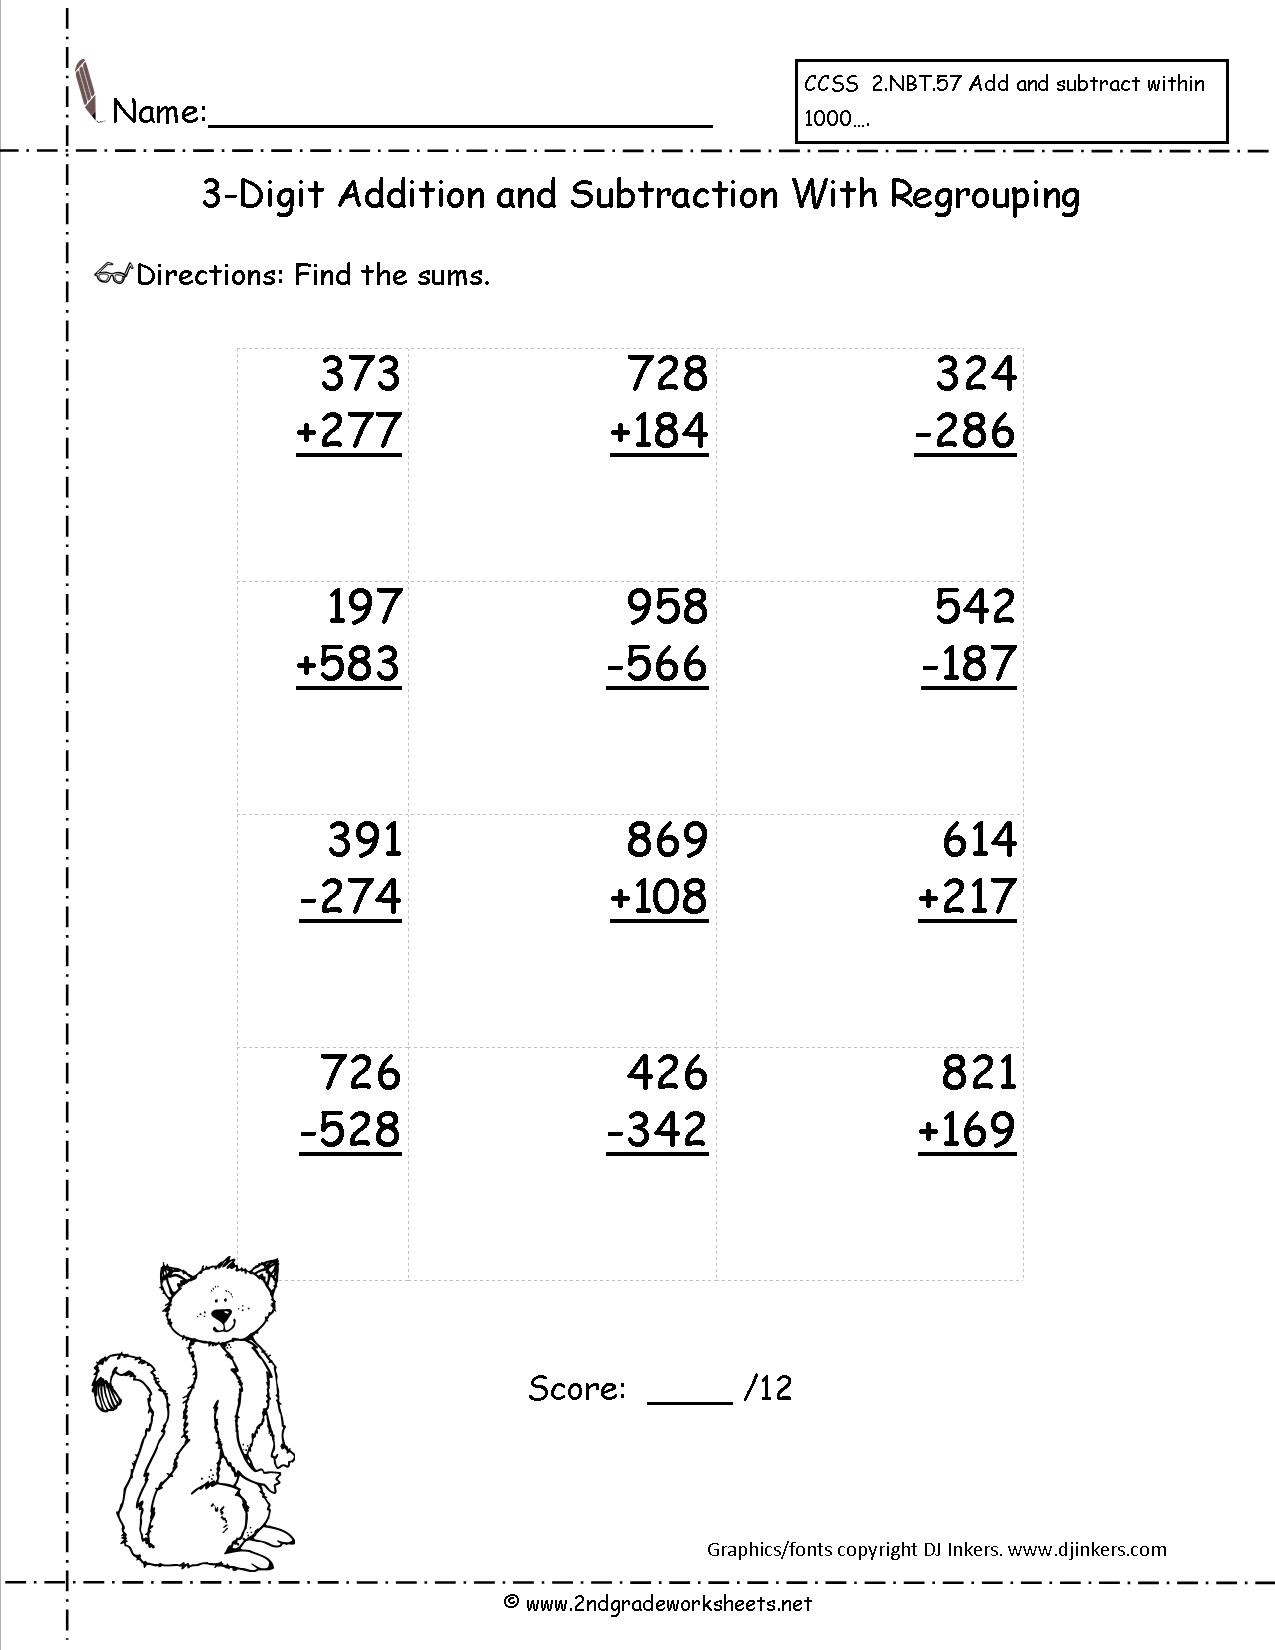 Free Printable Mixed Addition And Subtraction Worksheets - Free Printable